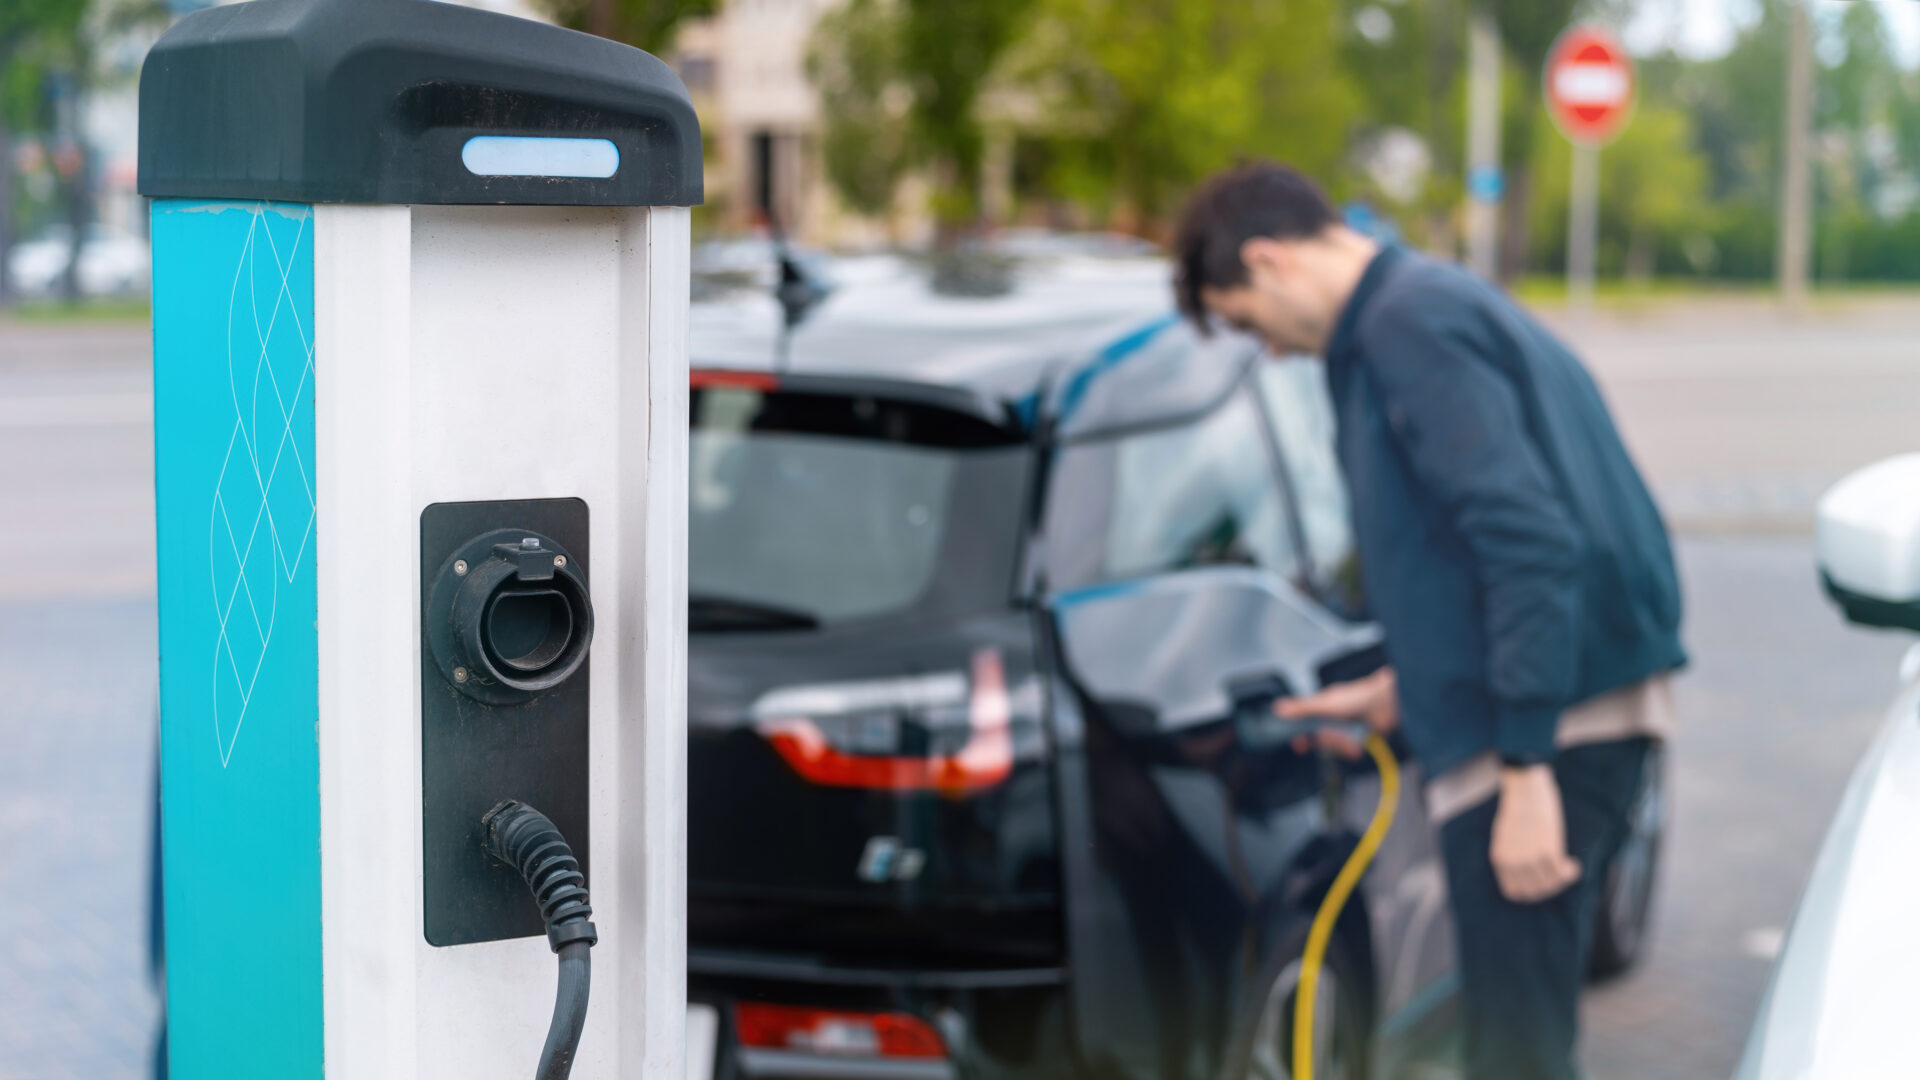 Electricians: Why Now is the Time to Install EV Charging stations